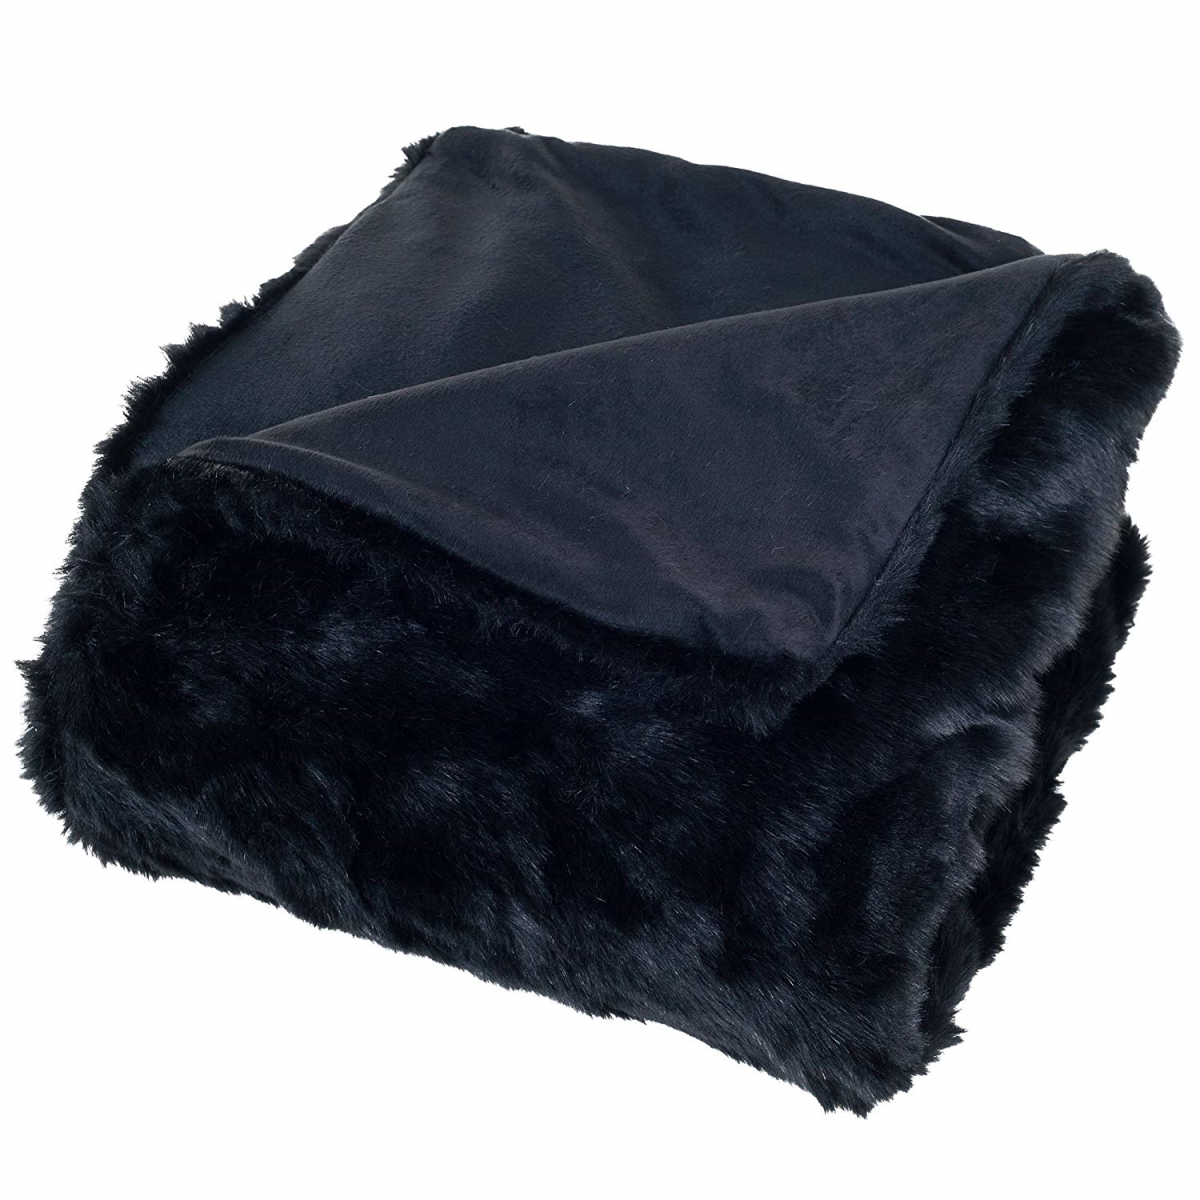 61a-26669 Luxury Long Haired Faux Fur Throw Blanket, Black